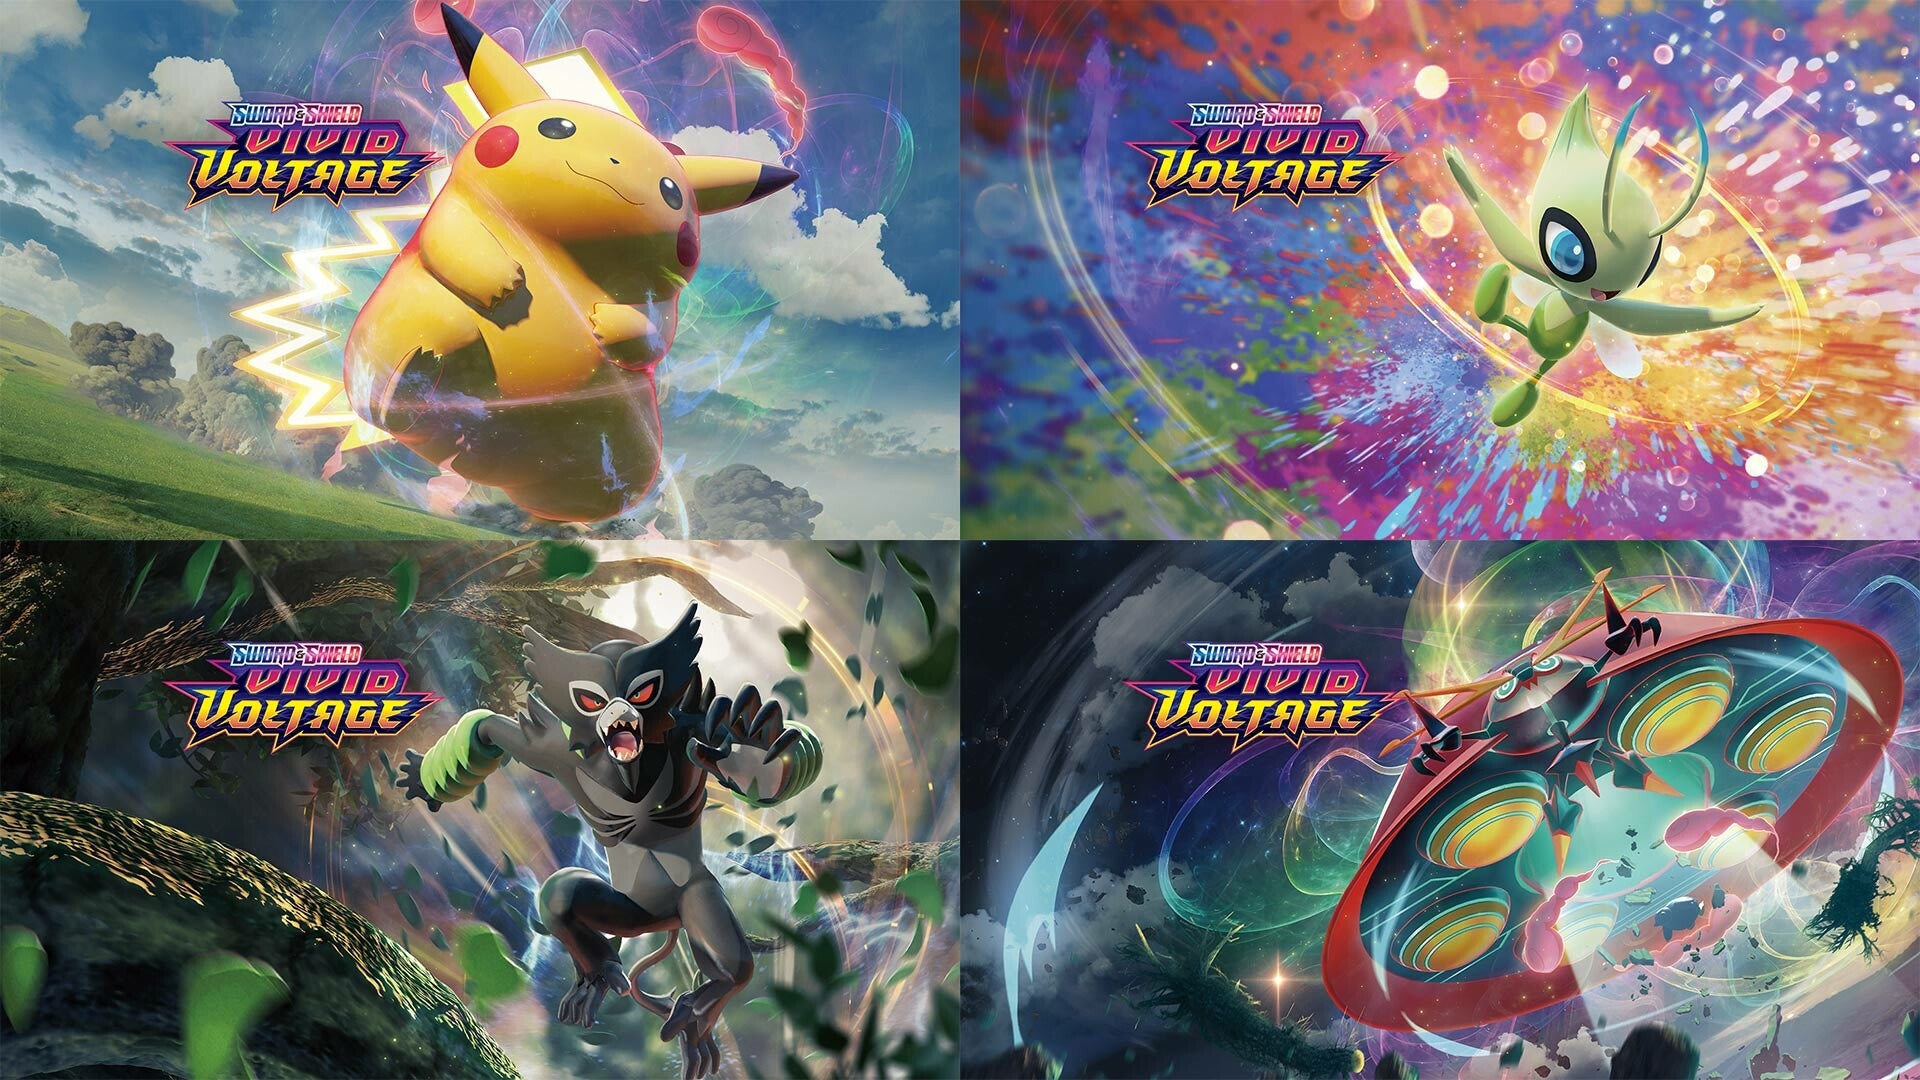 Pokemon Cards Wallpapers